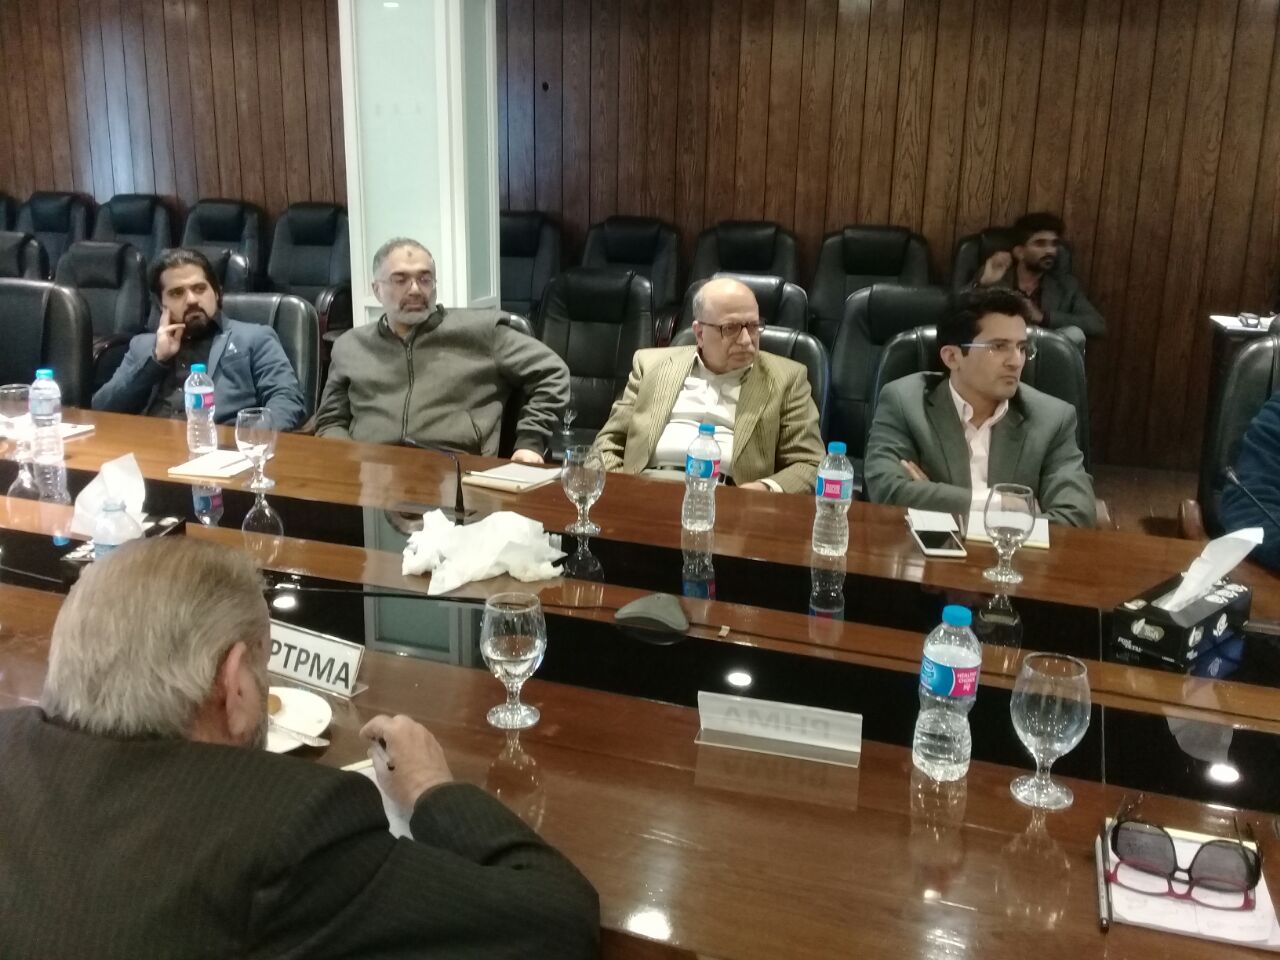 https://aptma.org.pk/wp-content/uploads/2021/10/Meeting-of-the-Textile-Industry-Associations-11.jpg